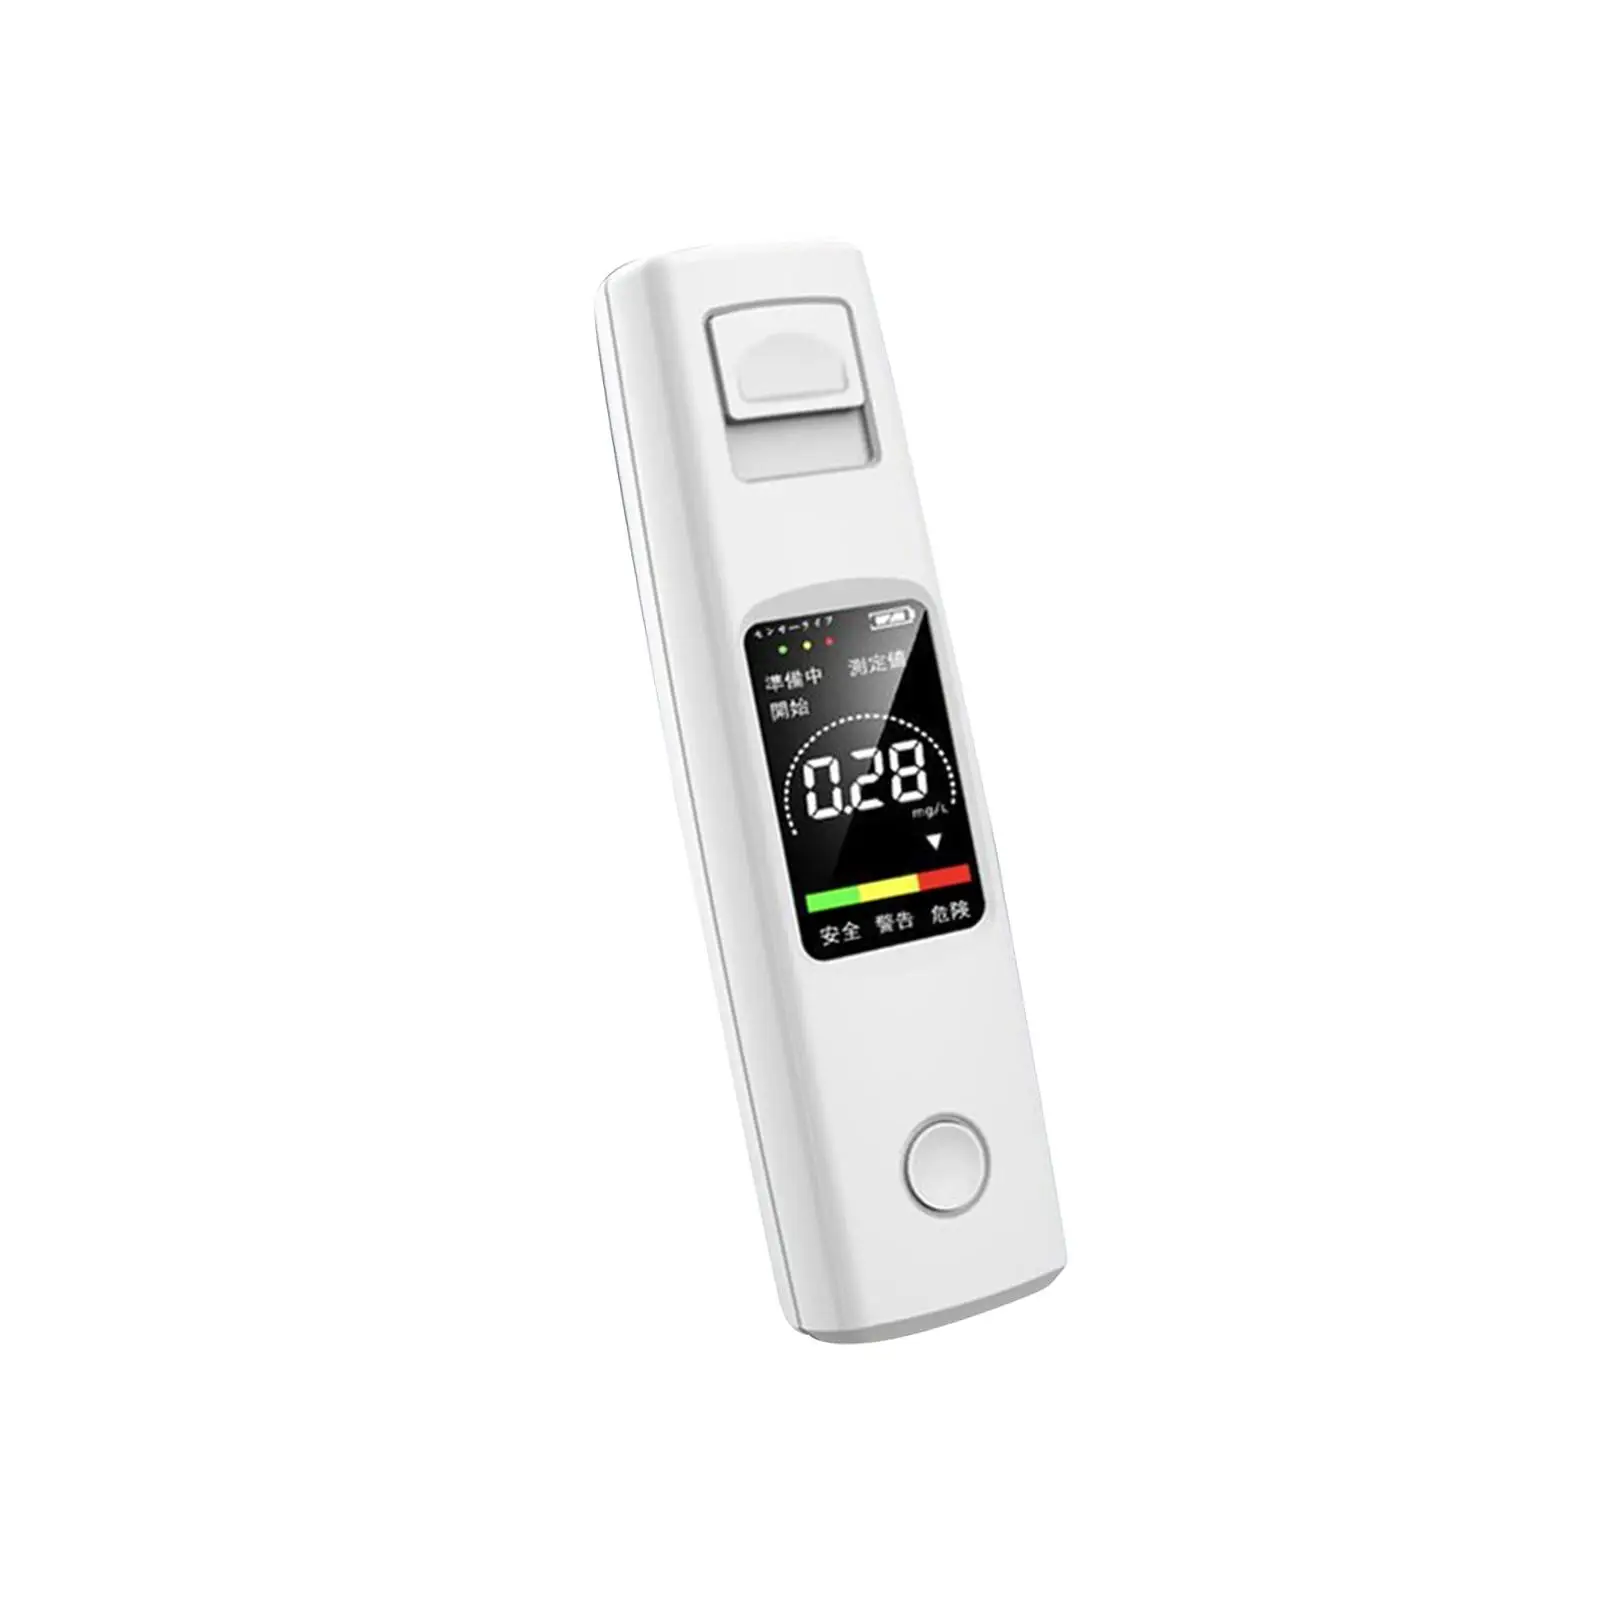 Alcohol Tester Upgrade Lightweight High Sensitivity for Drivers Home Use